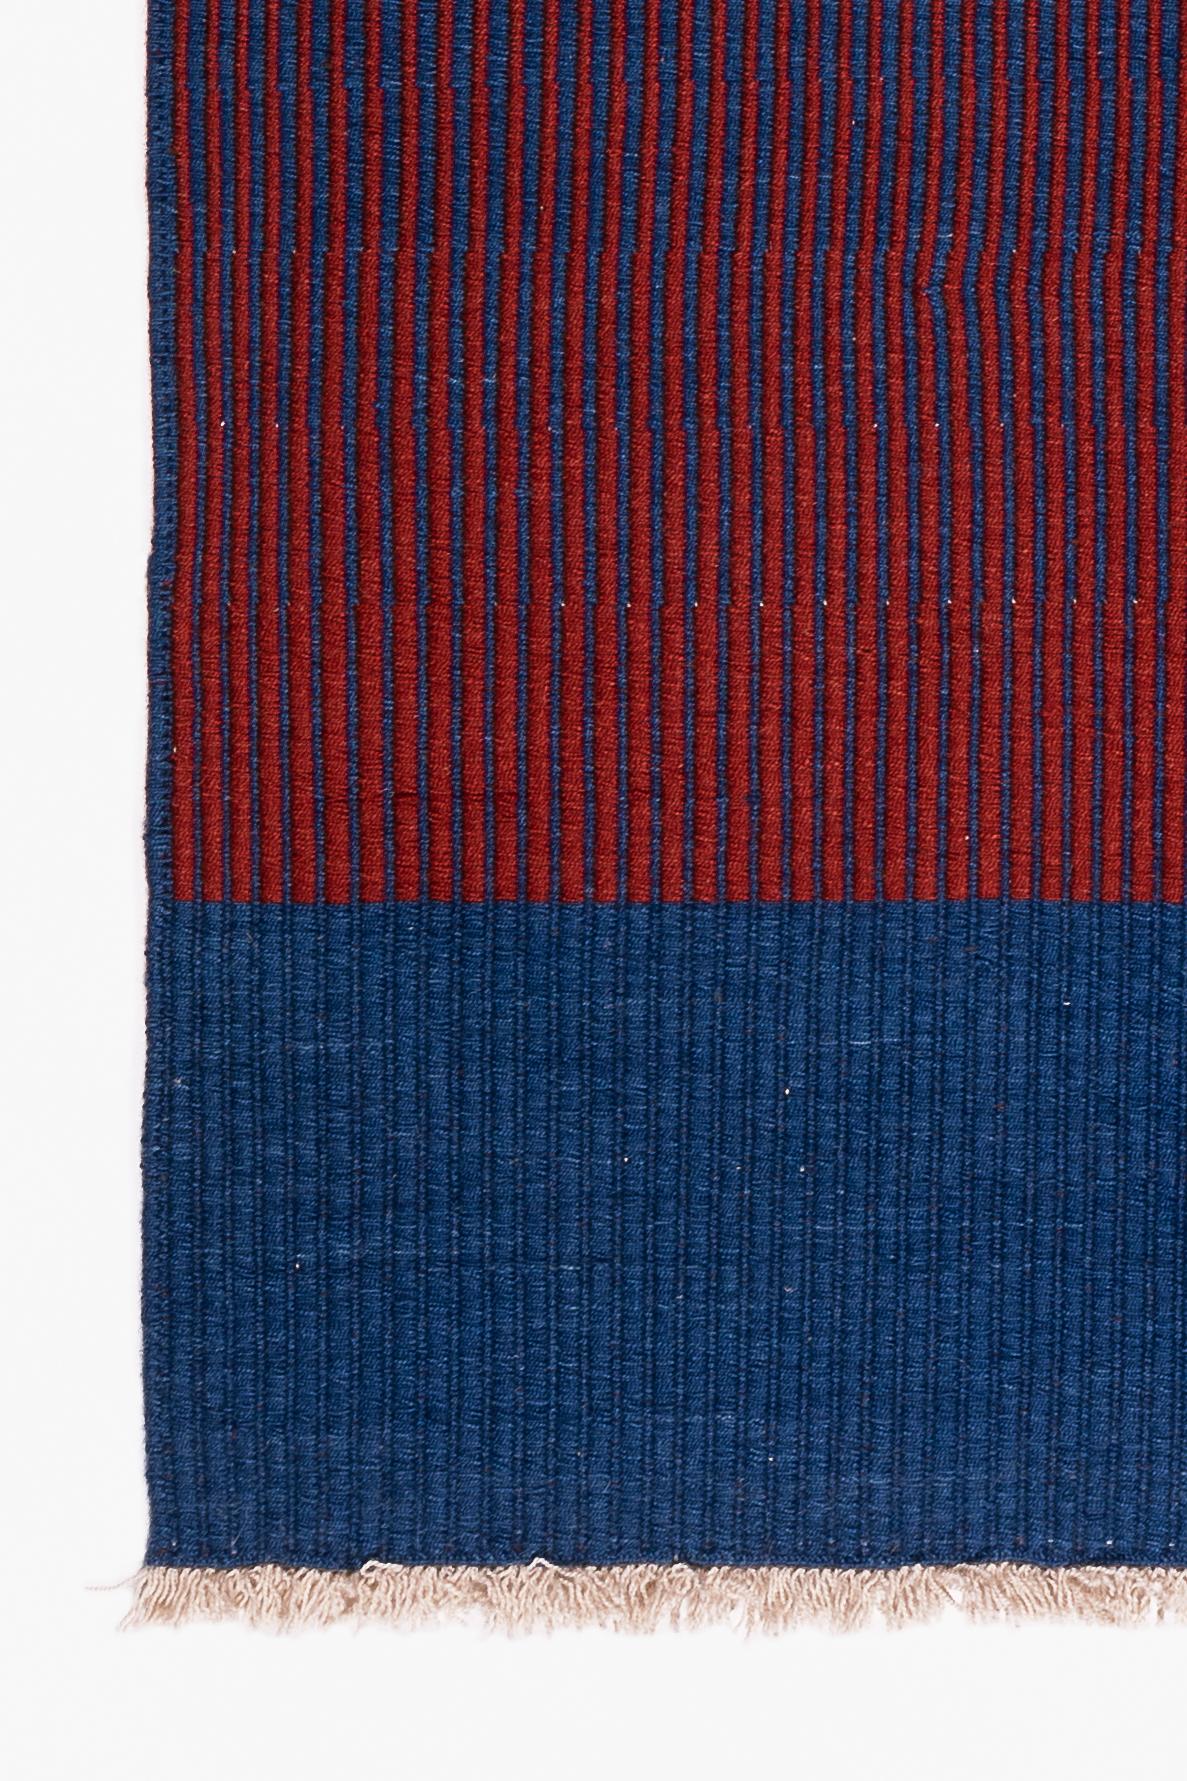 Haze is a contemporary Kilim rug collection inspired by the hazy view of landforms layered behind each other on a misty morning in Tuscany. 

This particular piece has a unique color and belongs to Haze Edition Series.

Haze rugs have a unique